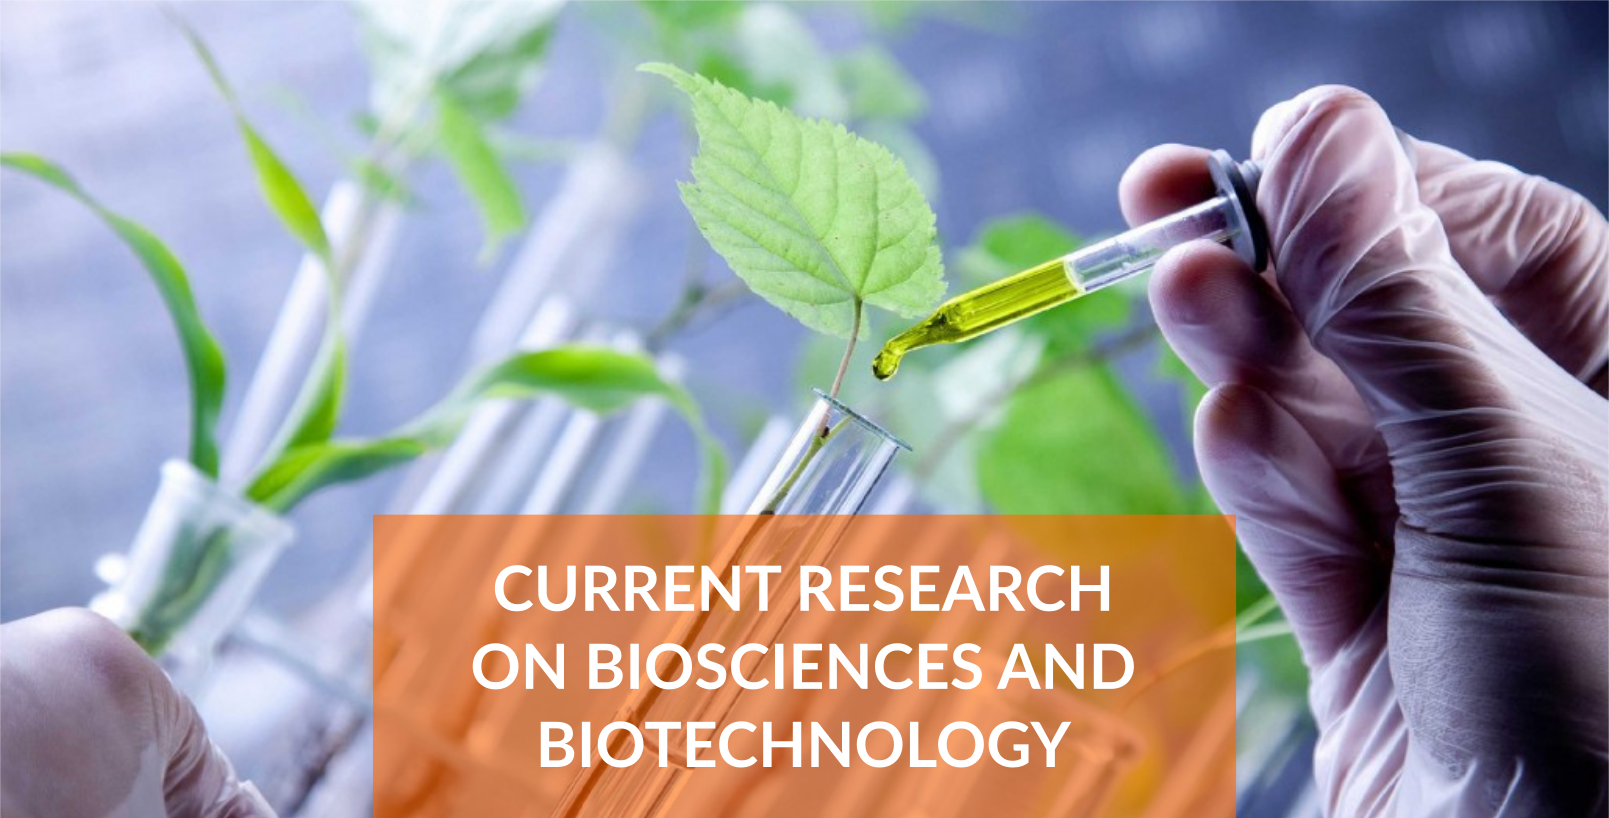 Current Research on Biosciences and Biotechnology